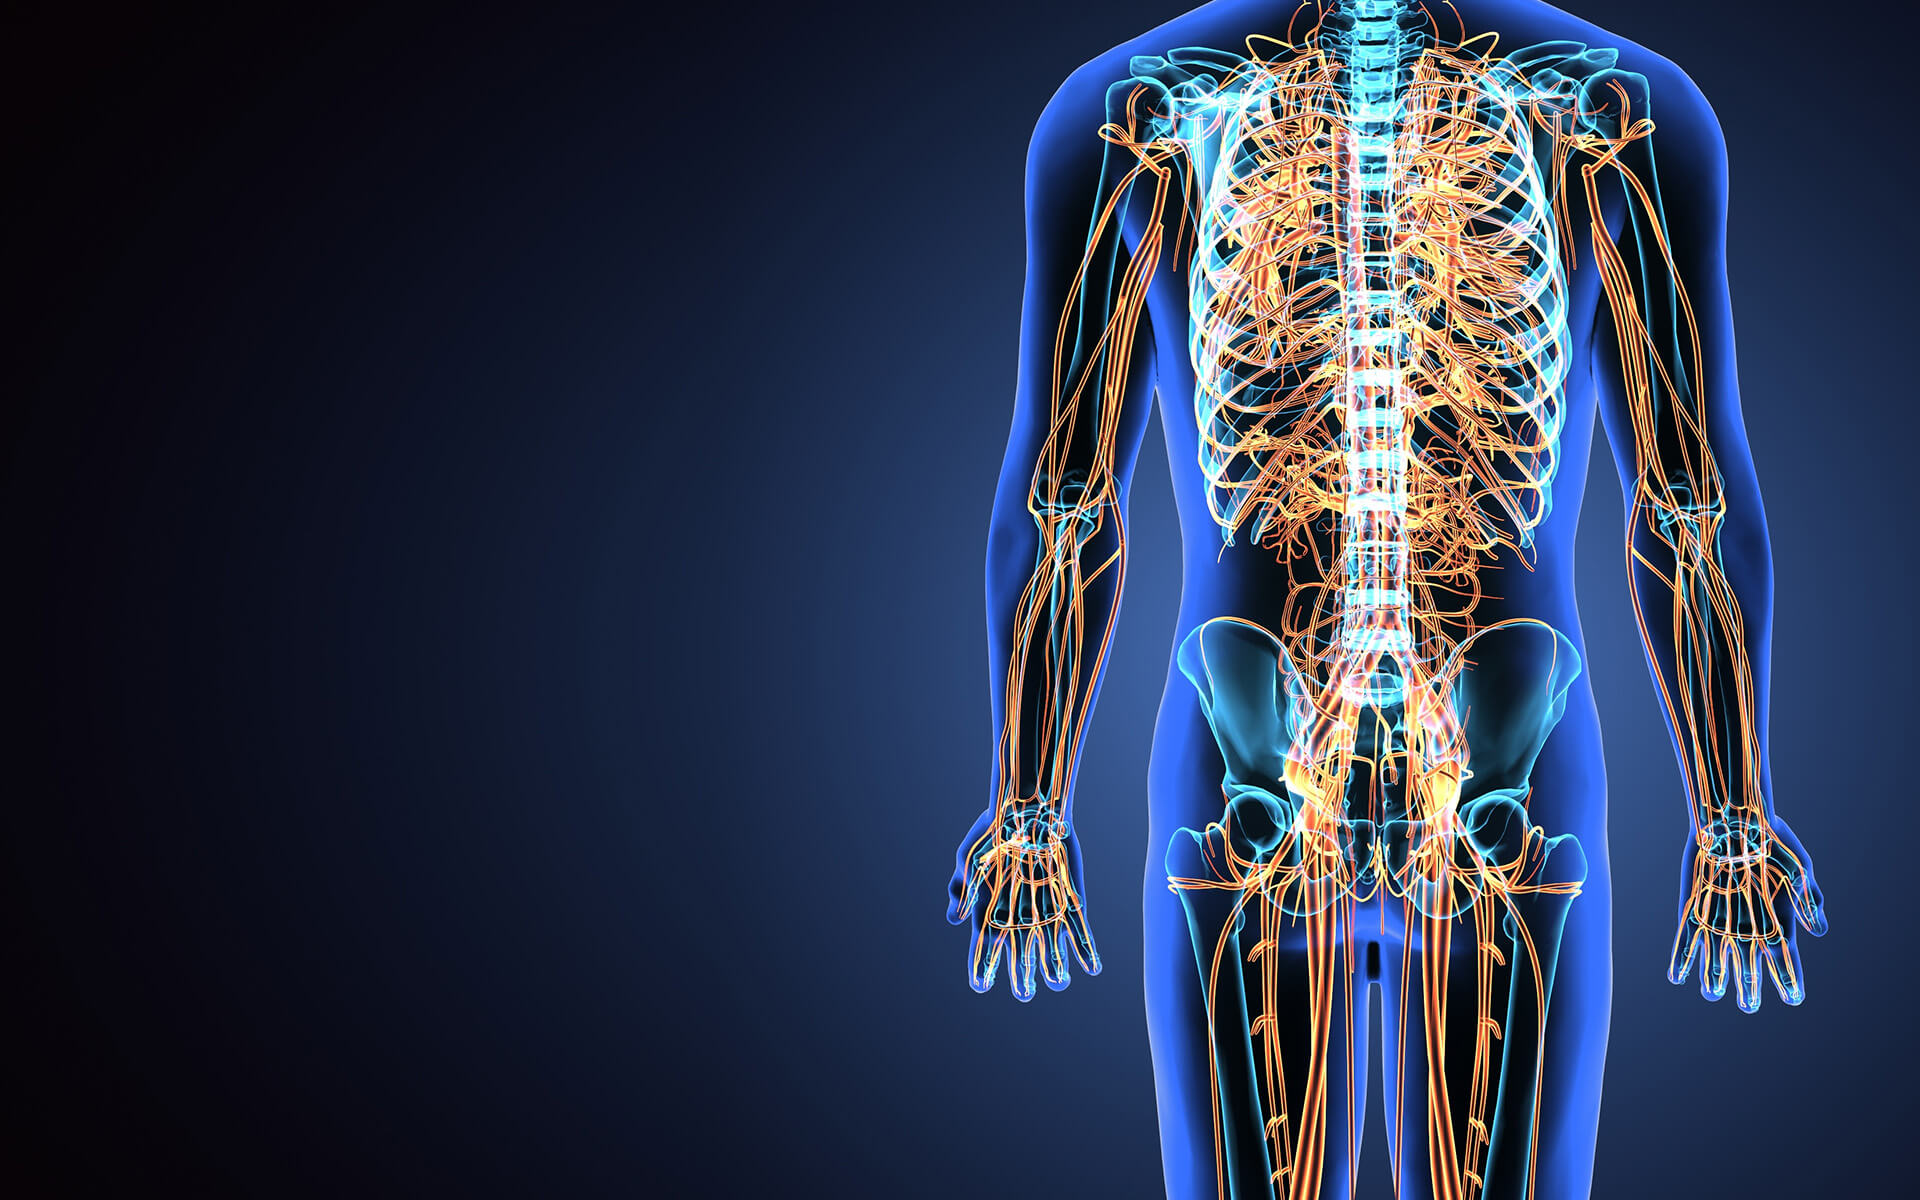 Nerve regeneration and muscle reinnervation. Neuromuscular electrical